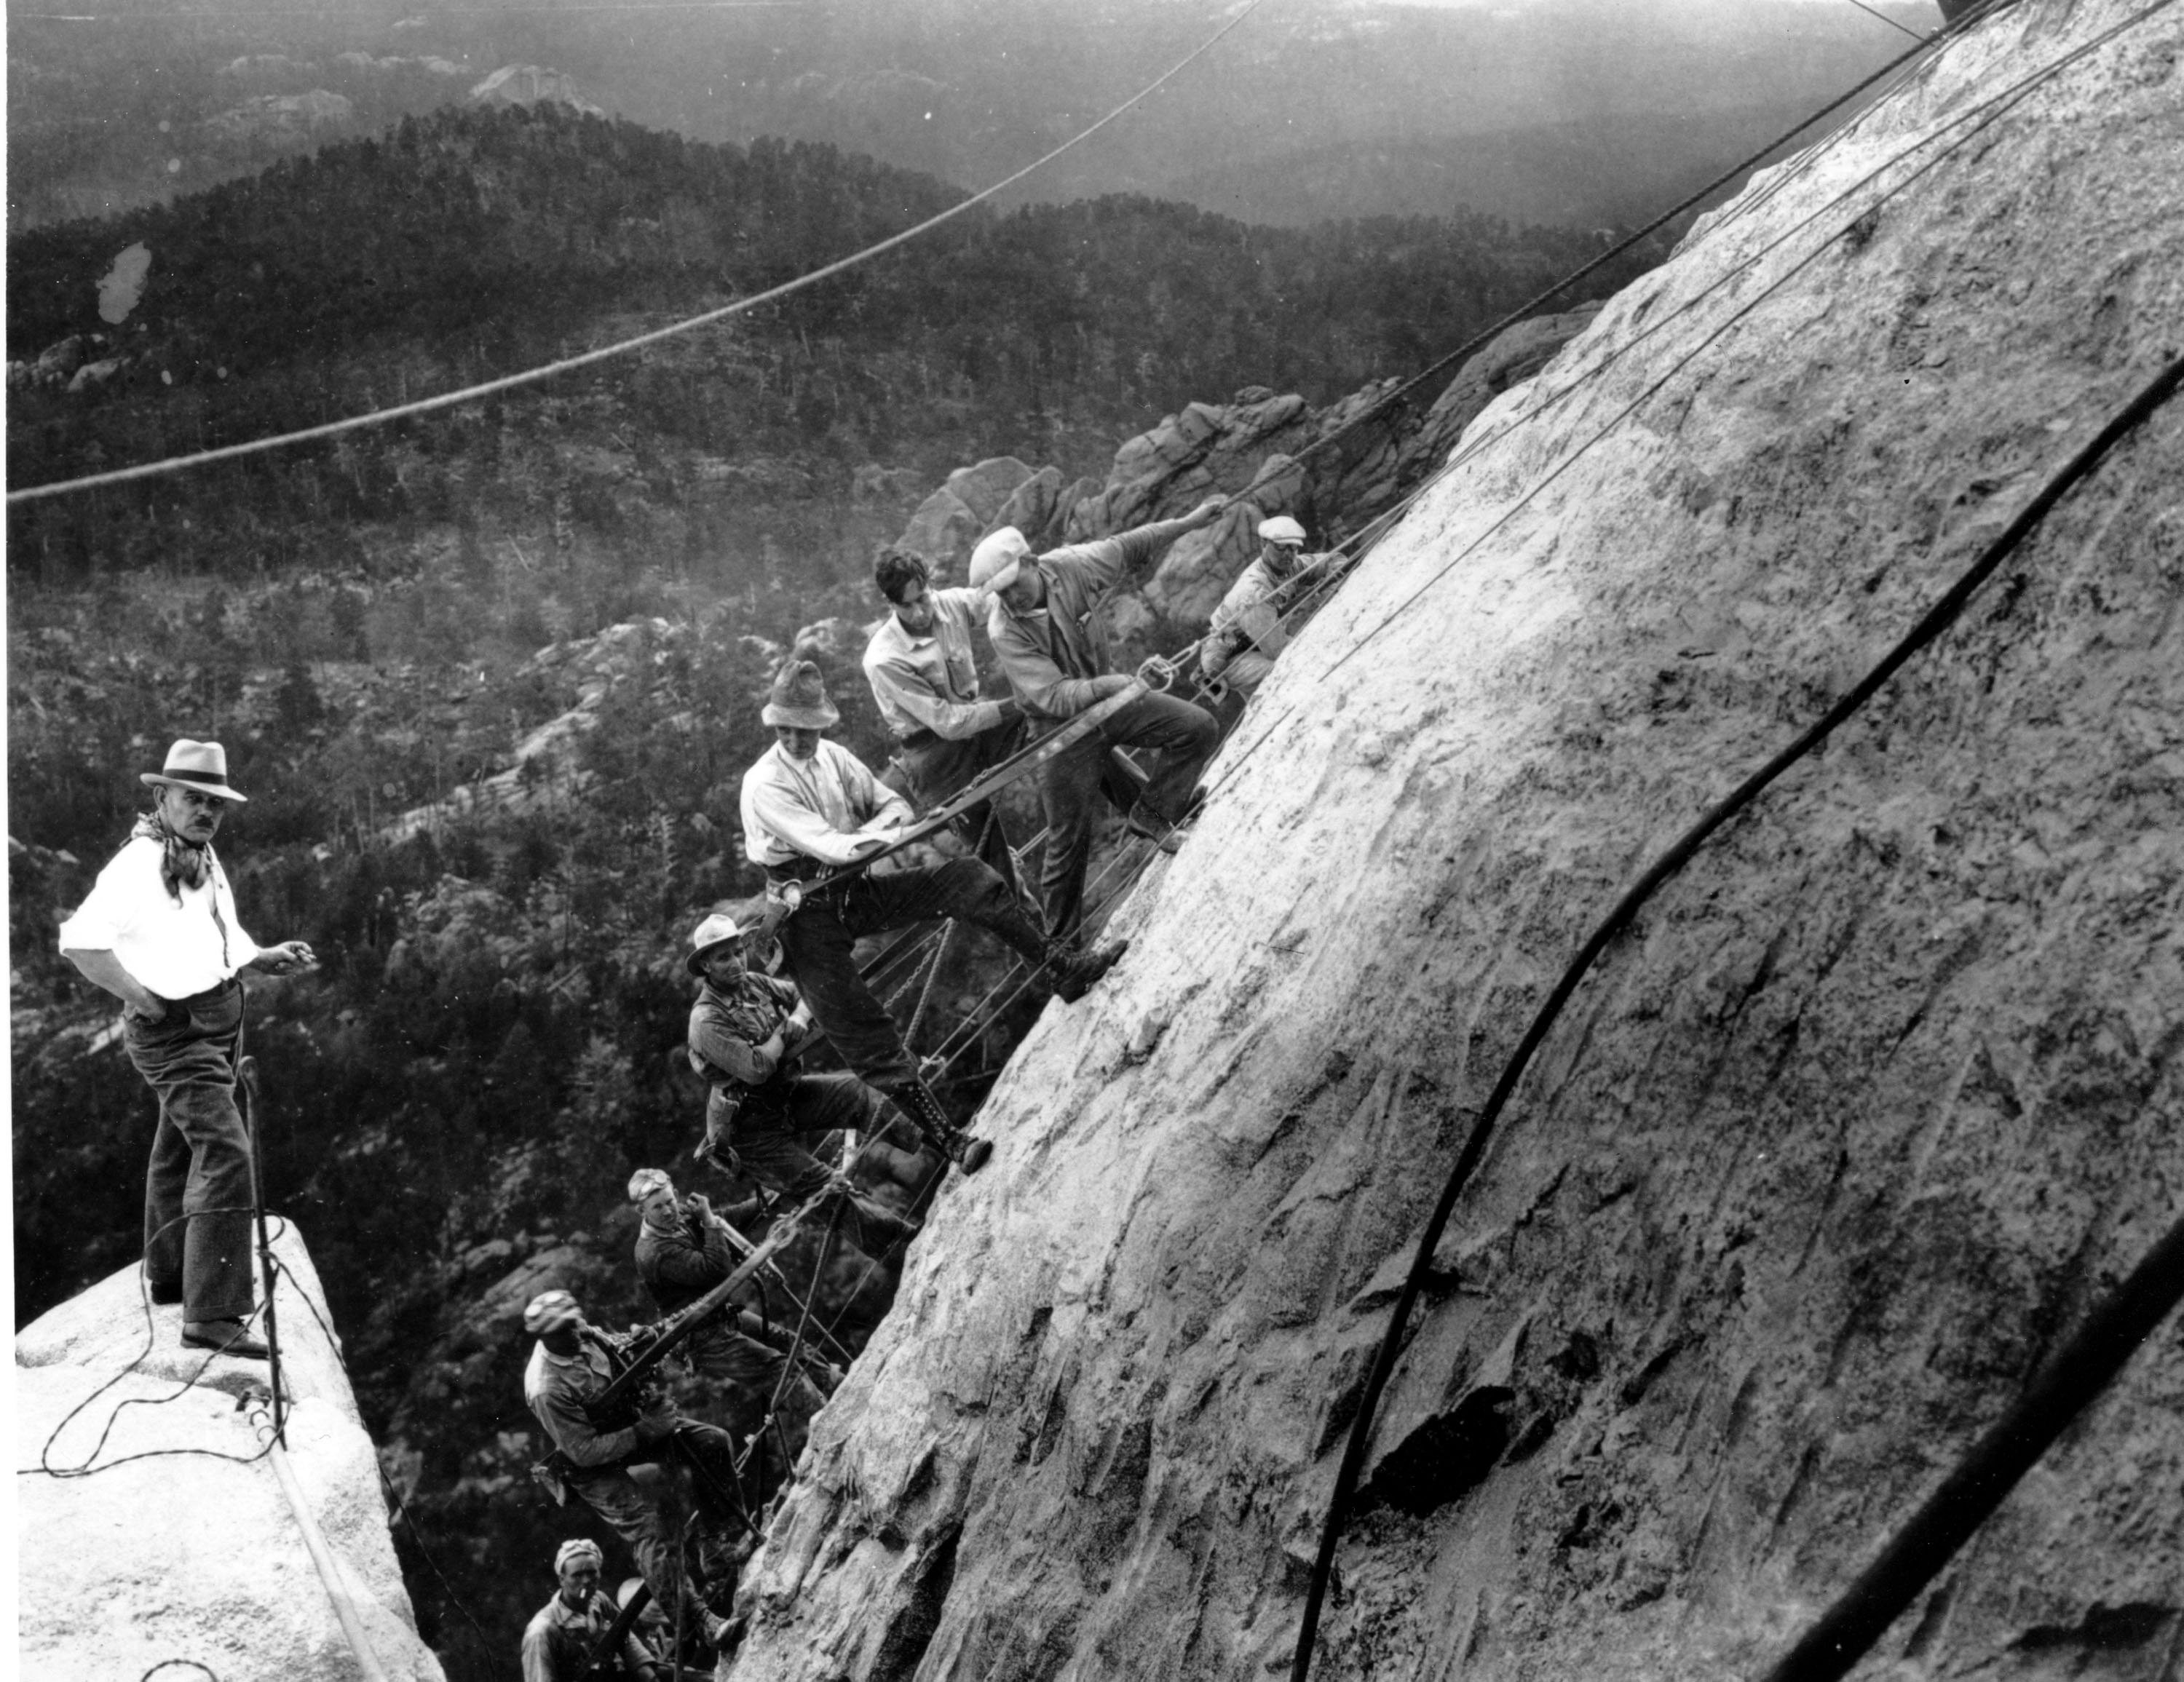 Drillers, suspended in slins fastened with cables to the winches at the top of the mountain, work on the George Washington head of the Mount Rushmore Memorial in the Black Hills area of Keystone, S.D. on July, 22, 1929.